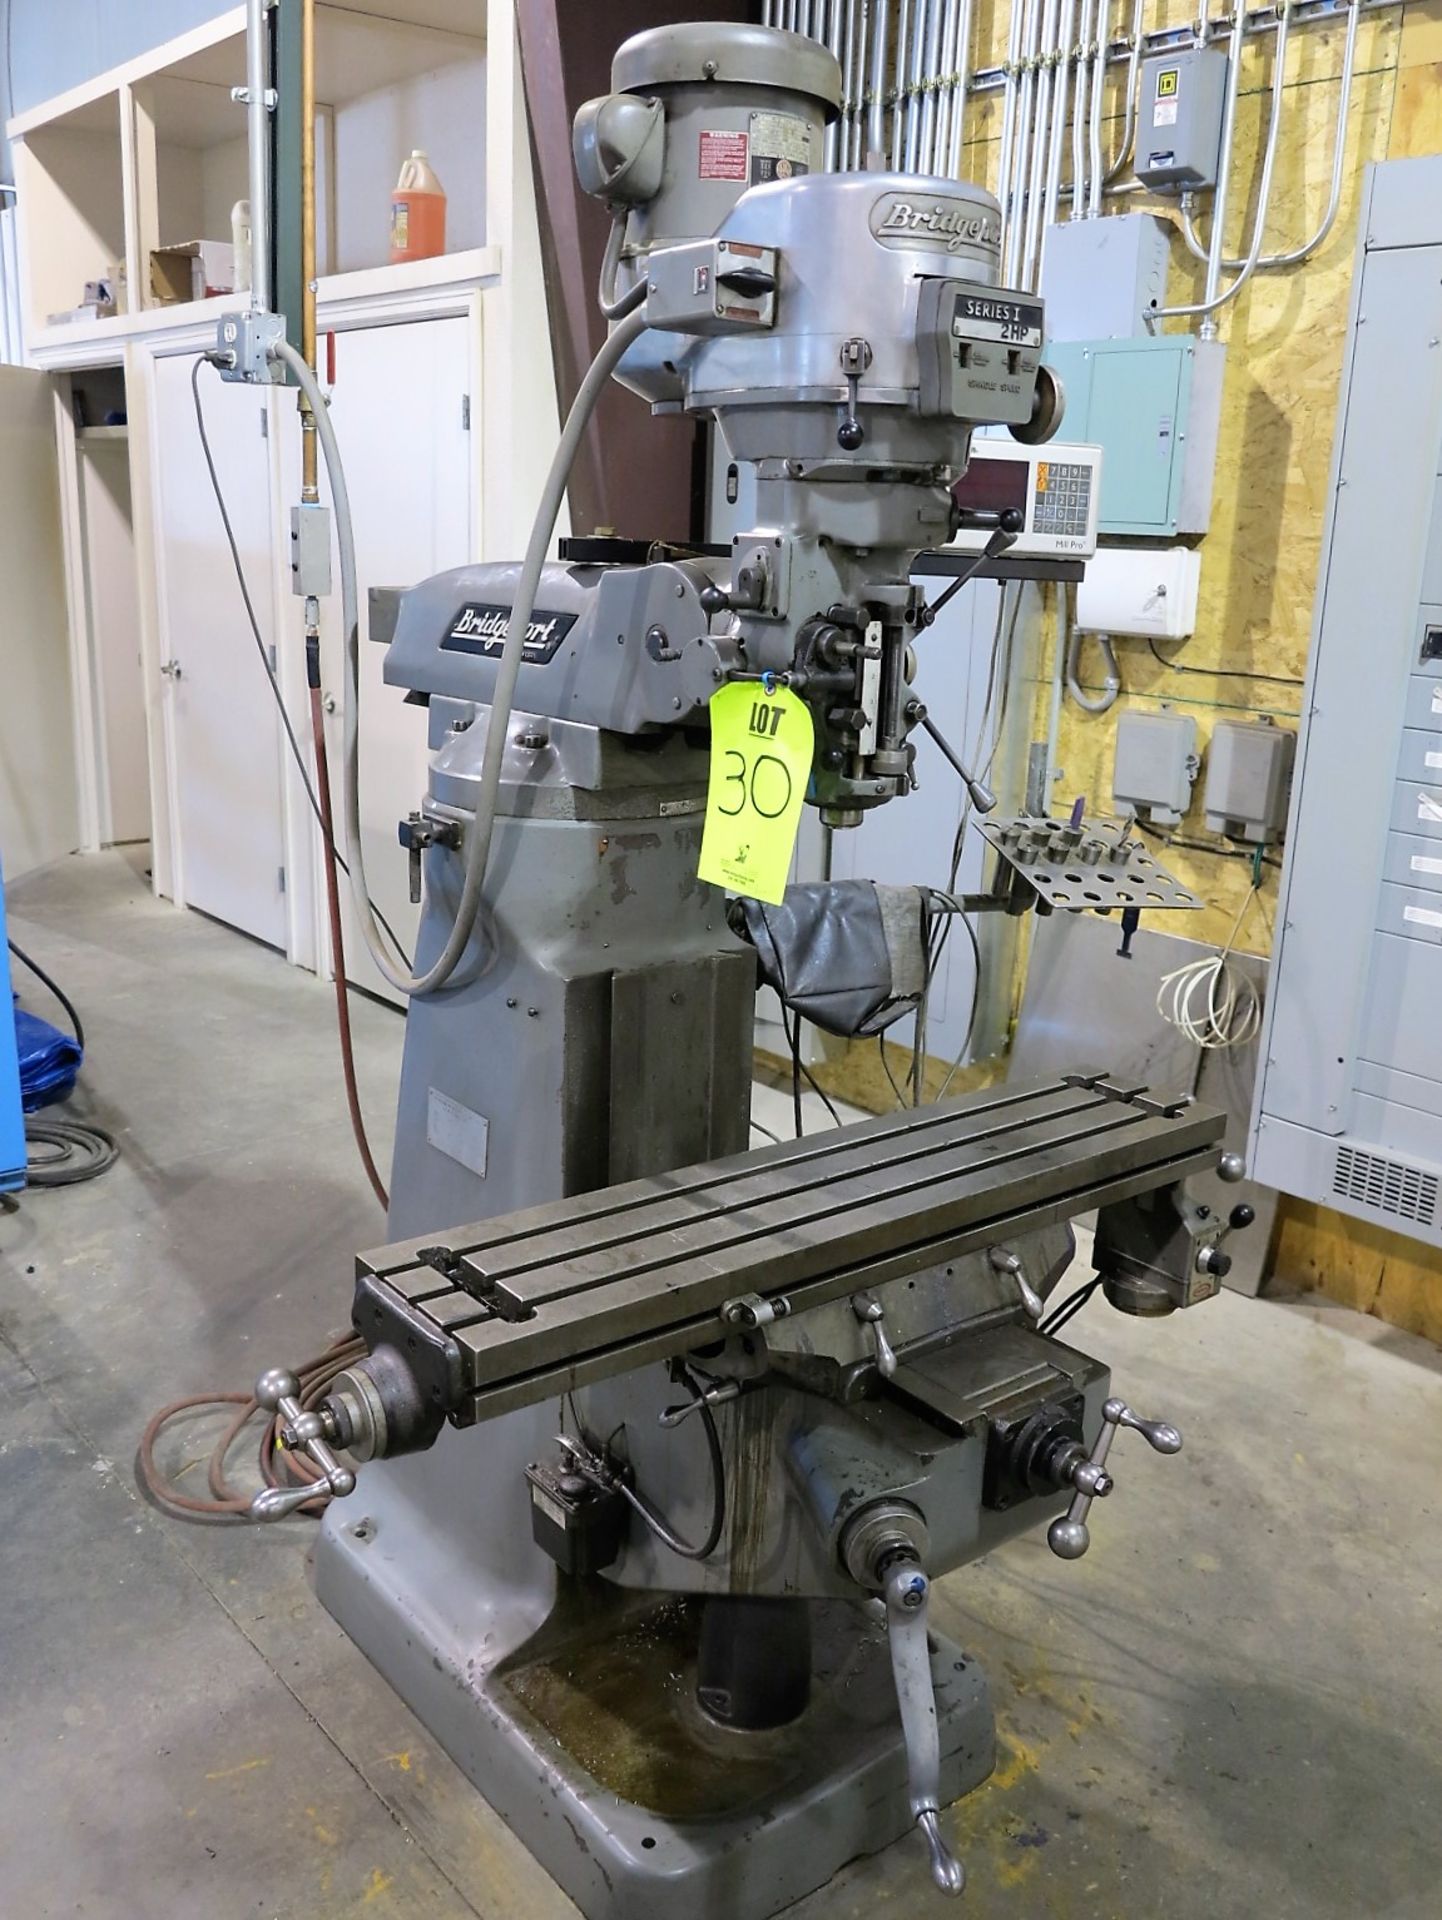 BRIDGEPORT VERTICAL MILL, SERIES I, 2 HP, DRO, POWER FEED. LOADING PROVIDED BY XL3 RIGGING AT A FEE.